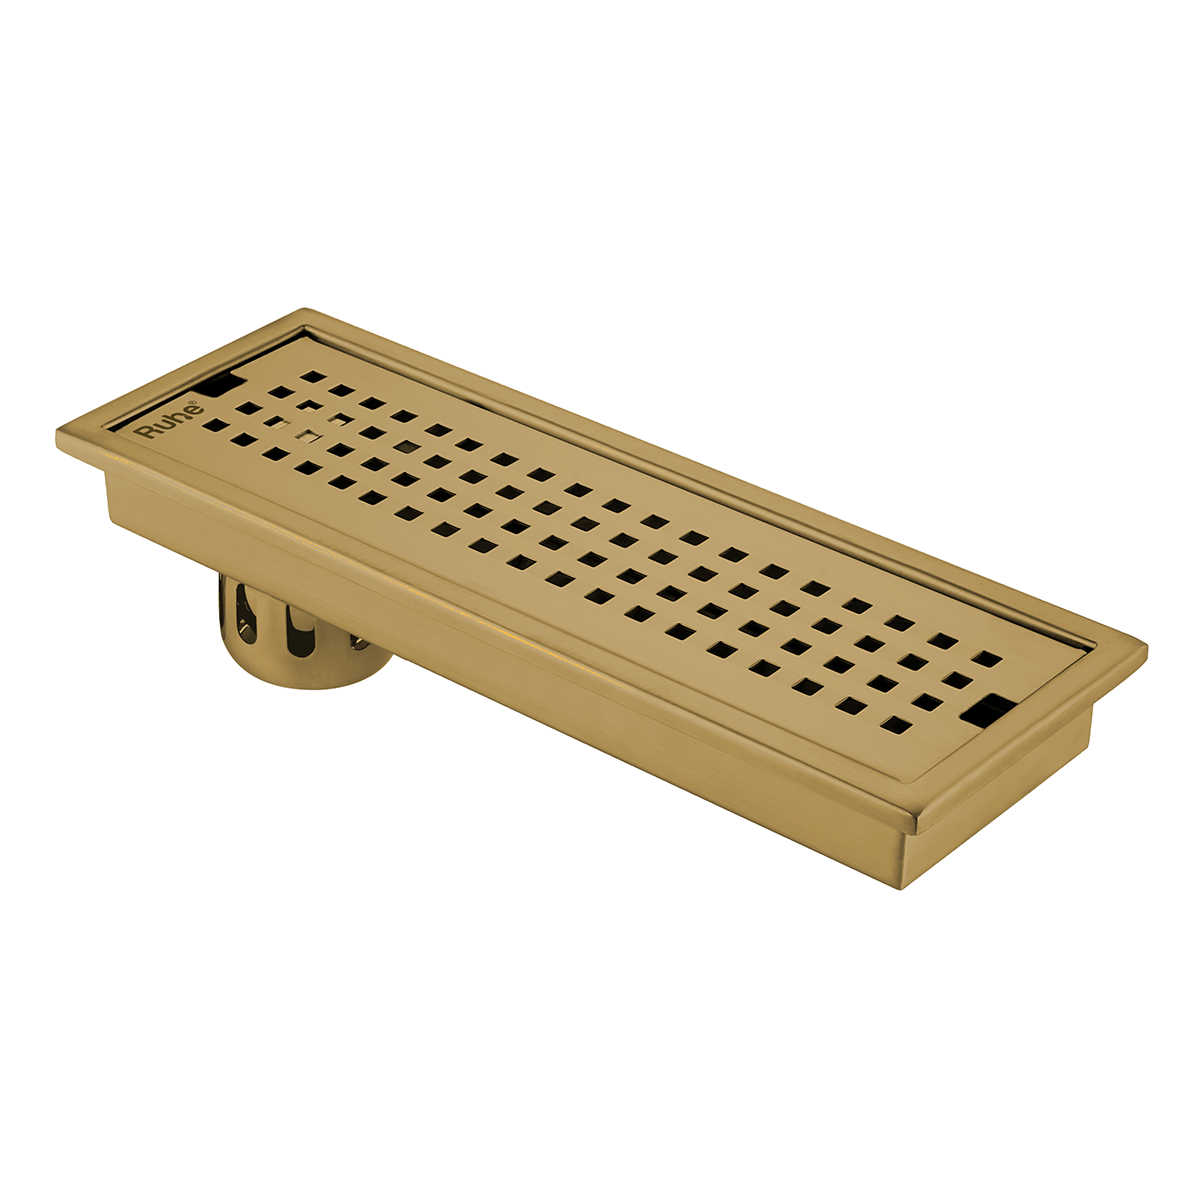 Palo Shower Drain Channel (24 x 5 Inches) YELLOW GOLD